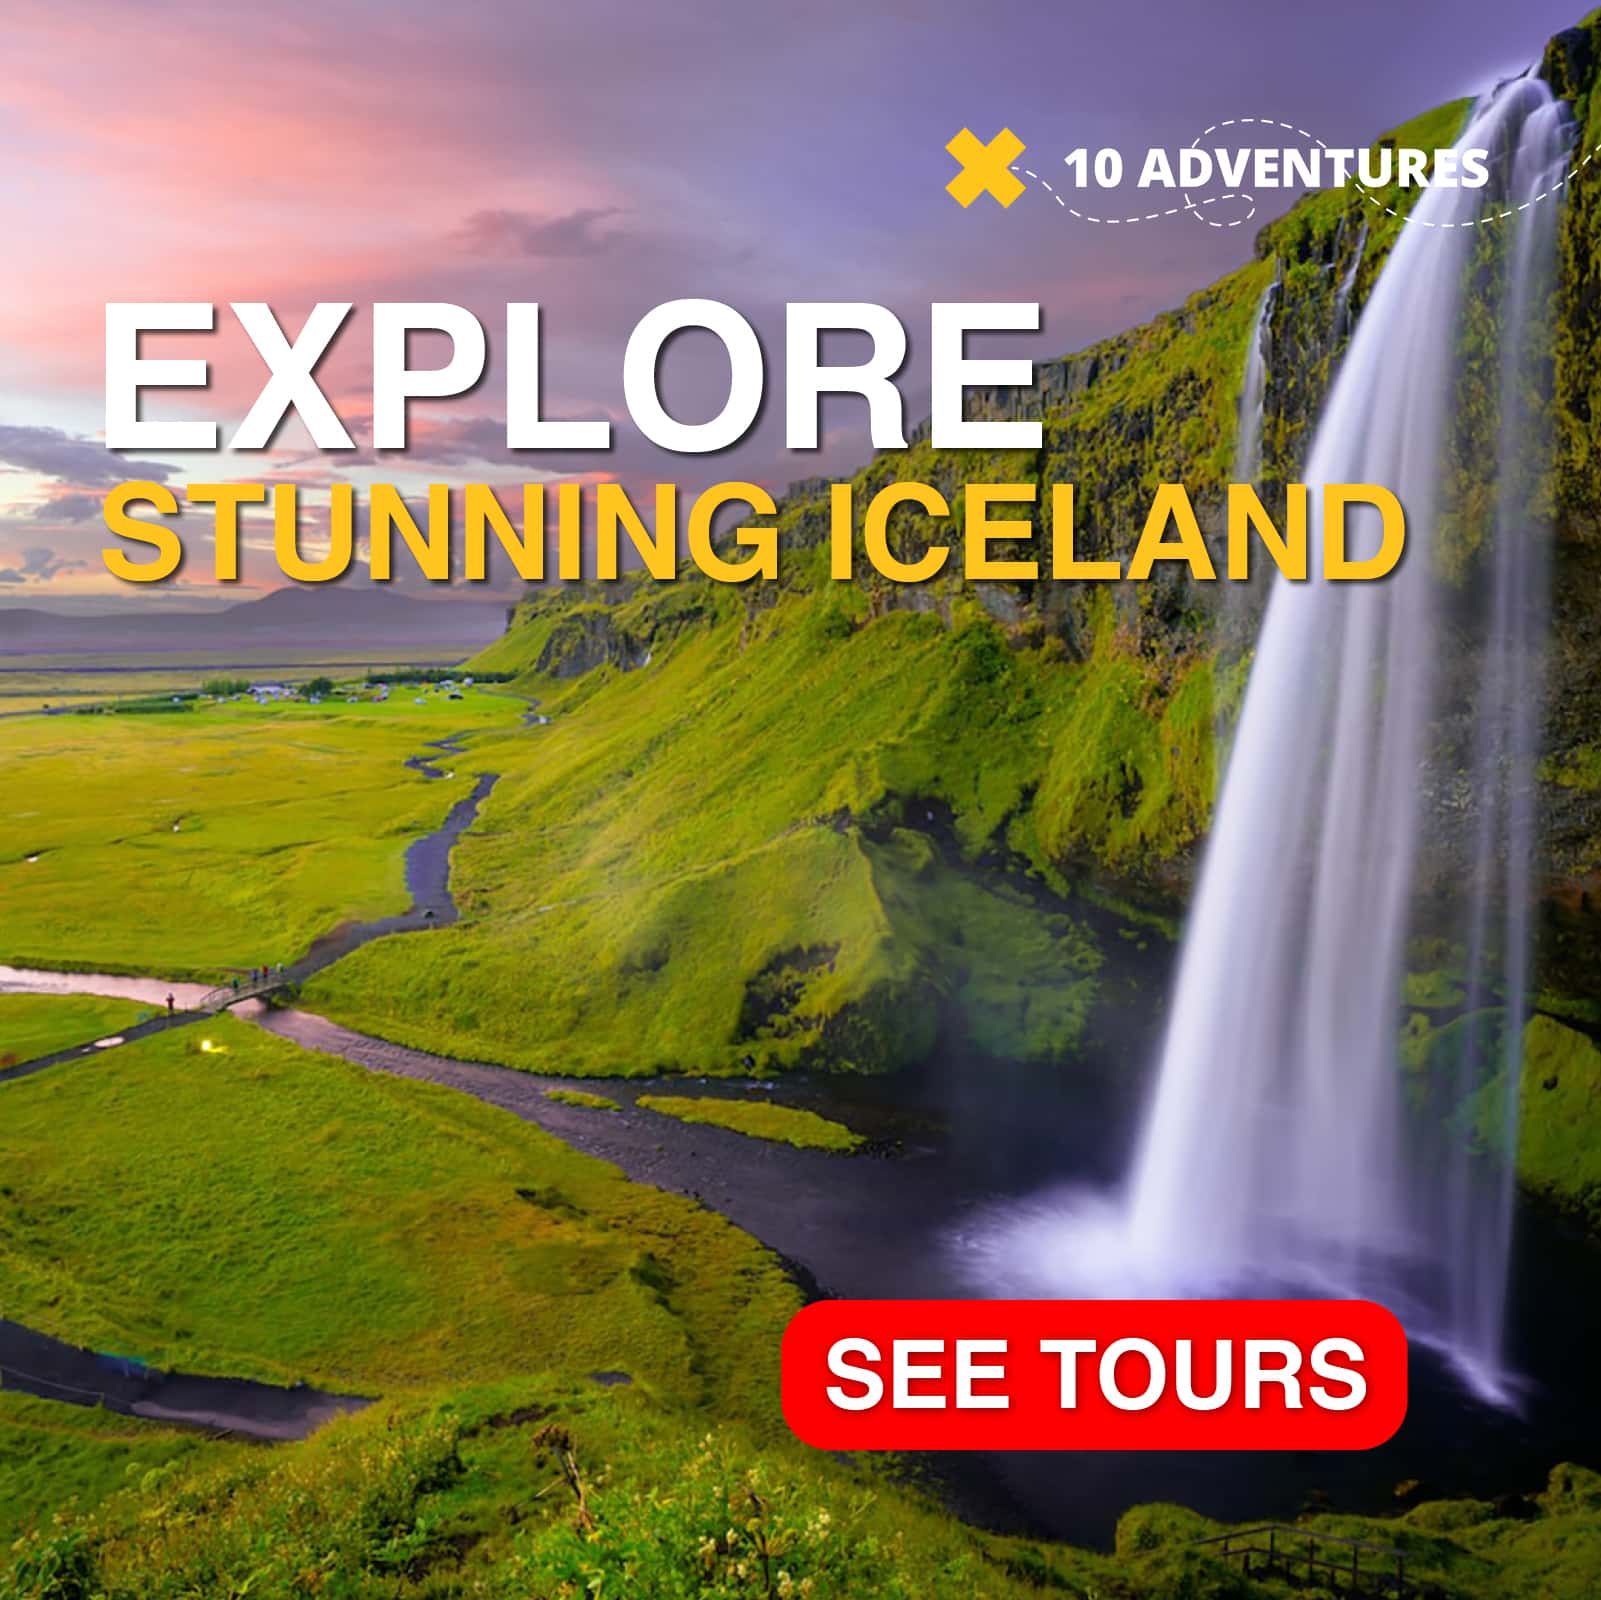 Check out our selection of great tours in Iceland - from trekking, to relaxing wellness tours